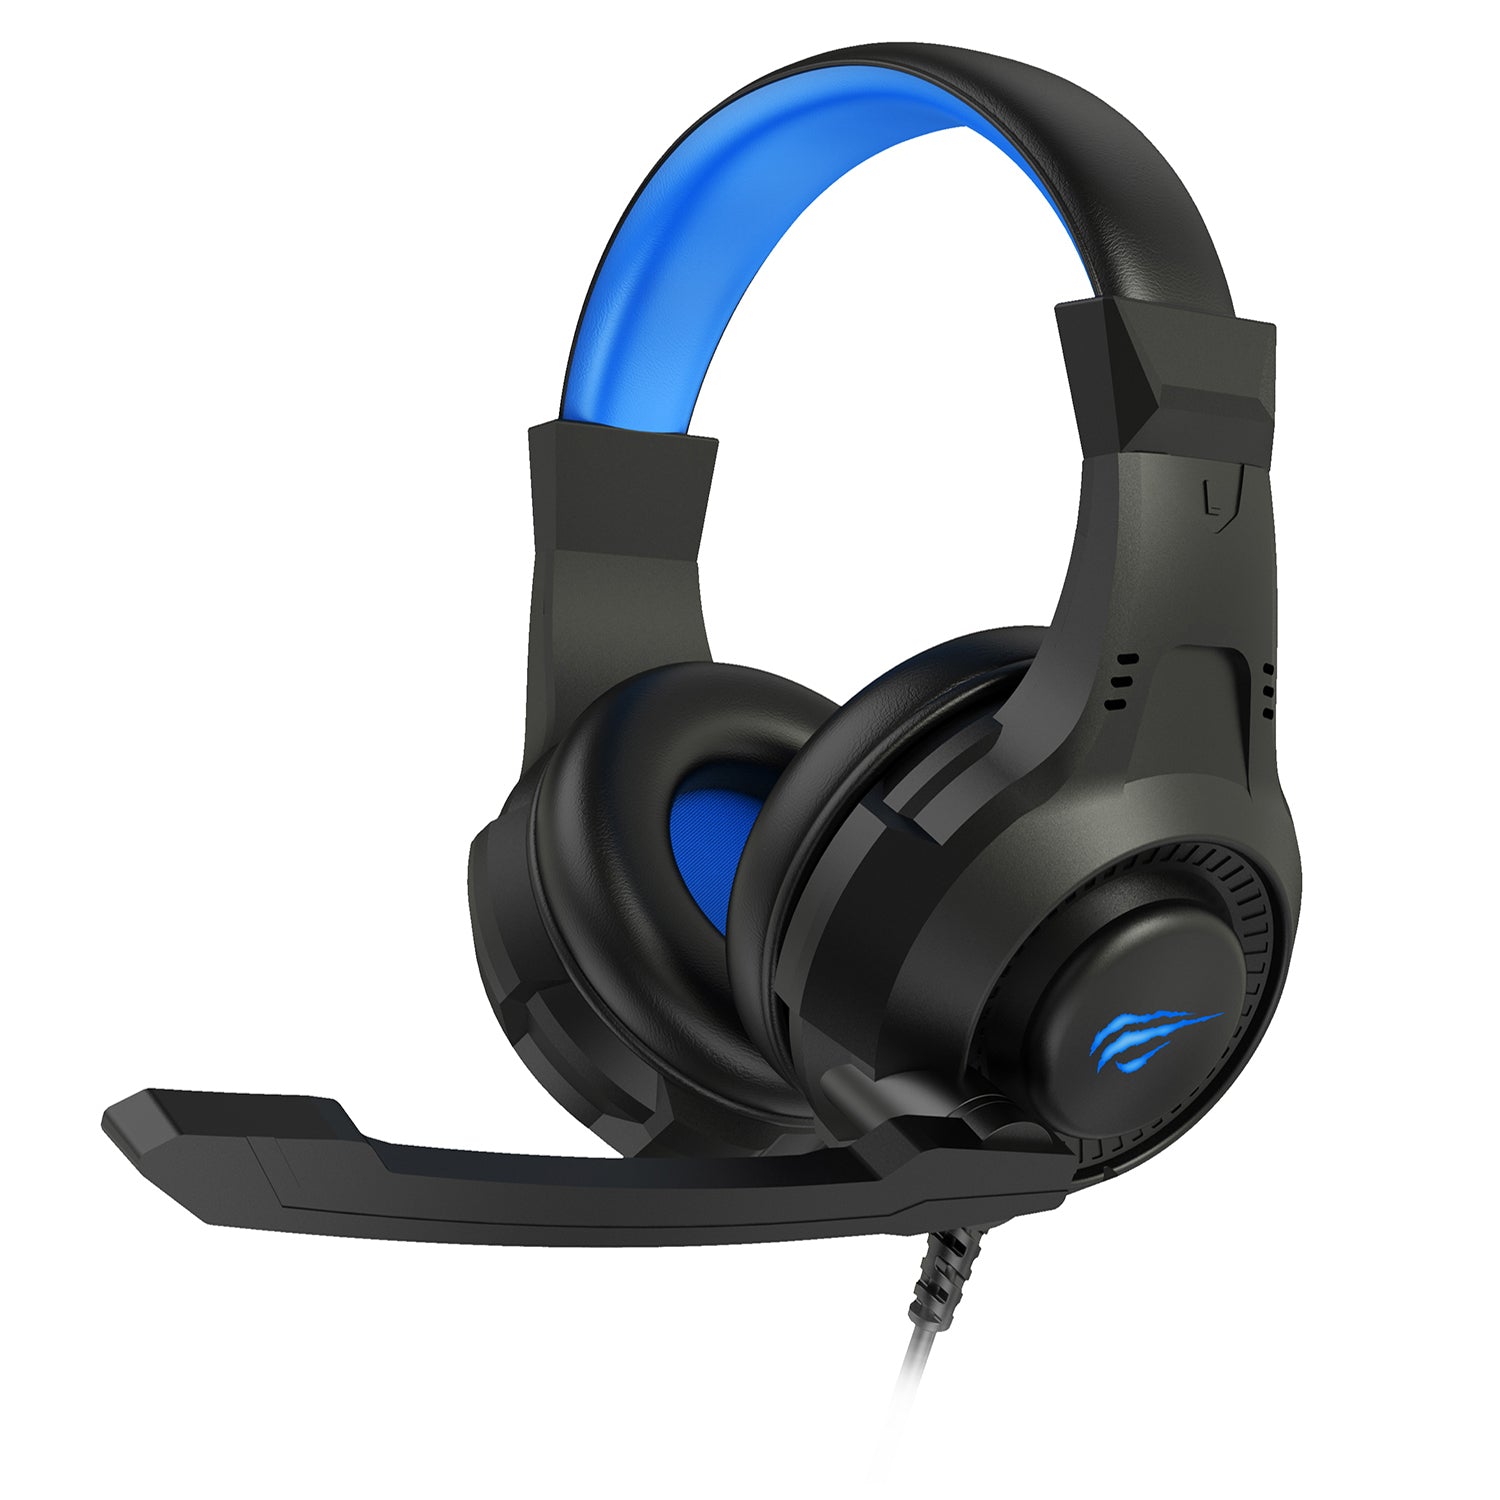 HAVIT H2031D E-sports Gaming Headset for PC, Xbox One, PS4, PS5, Nintendo Switch